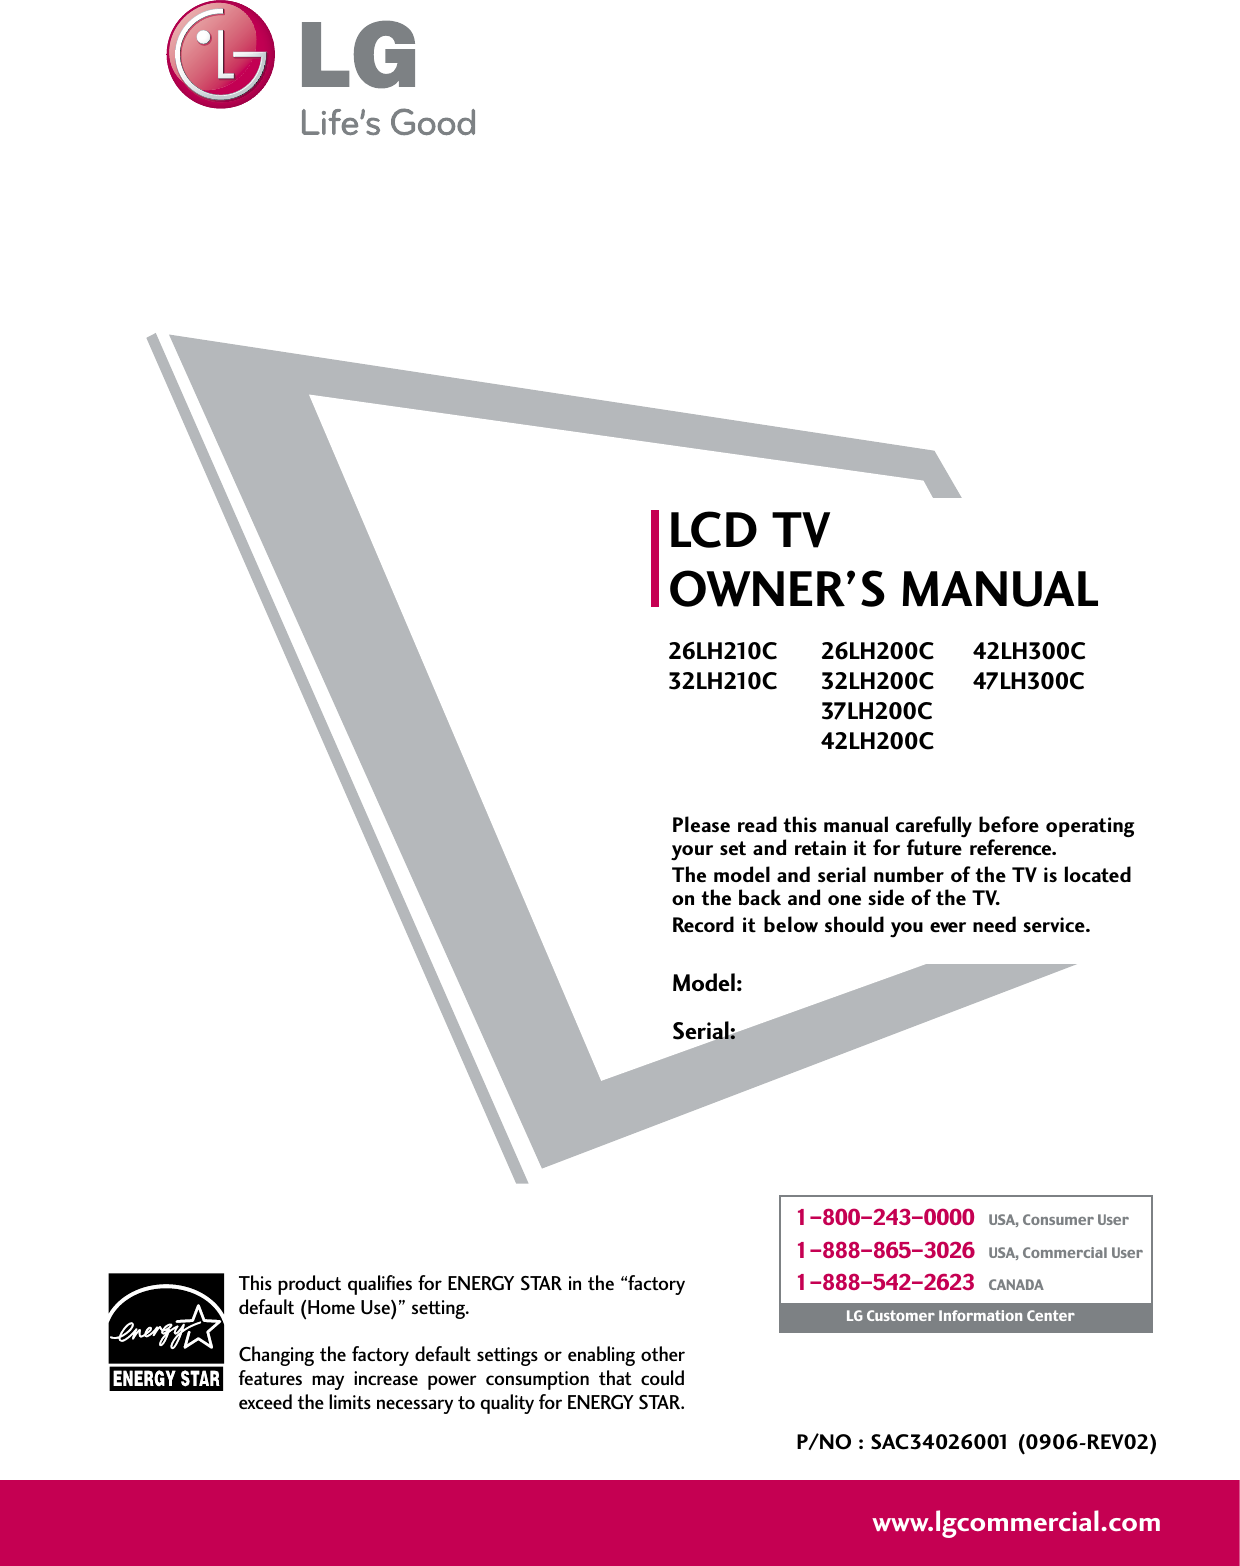 Please read this manual carefully before operatingyour set and retain it for future reference.The model and serial number of the TV is locatedon the back and one side of the TV. Record it below should you ever need service.Model:Serial:LCD TVOWNER’S MANUAL26LH210C32LH210C26LH200C32LH200C37LH200C42LH200C42LH300C47LH300CP/NO : SAC34026001 (0906-REV02)www.lgcommercial.comThis product qualifies for ENERGY STAR in the “factorydefault (Home Use)” setting.Changing the factory default settings or enabling otherfeatures  may  increase  power  consumption  that  couldexceed the limits necessary to quality for ENERGY STAR.1-800-243-0000   USA, Consumer User1-888-865-3026   USA, Commercial User1-888-542-2623   CANADALG Customer Information Center